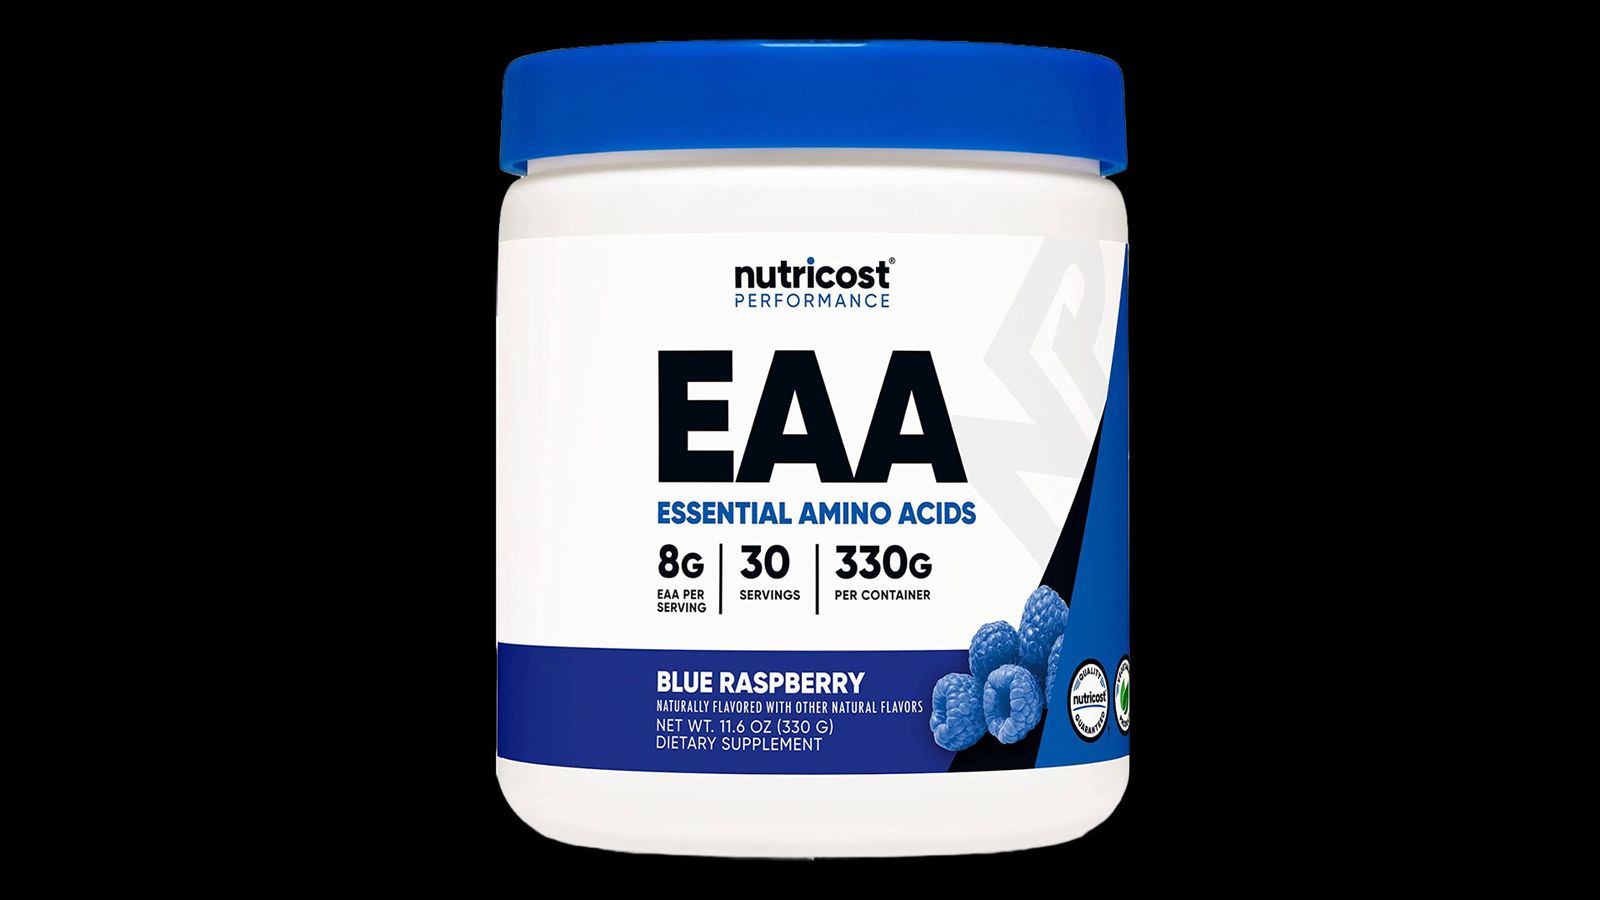 Nutricost EAA Powder product image of a white container with blueberry graphics and a blue lid.